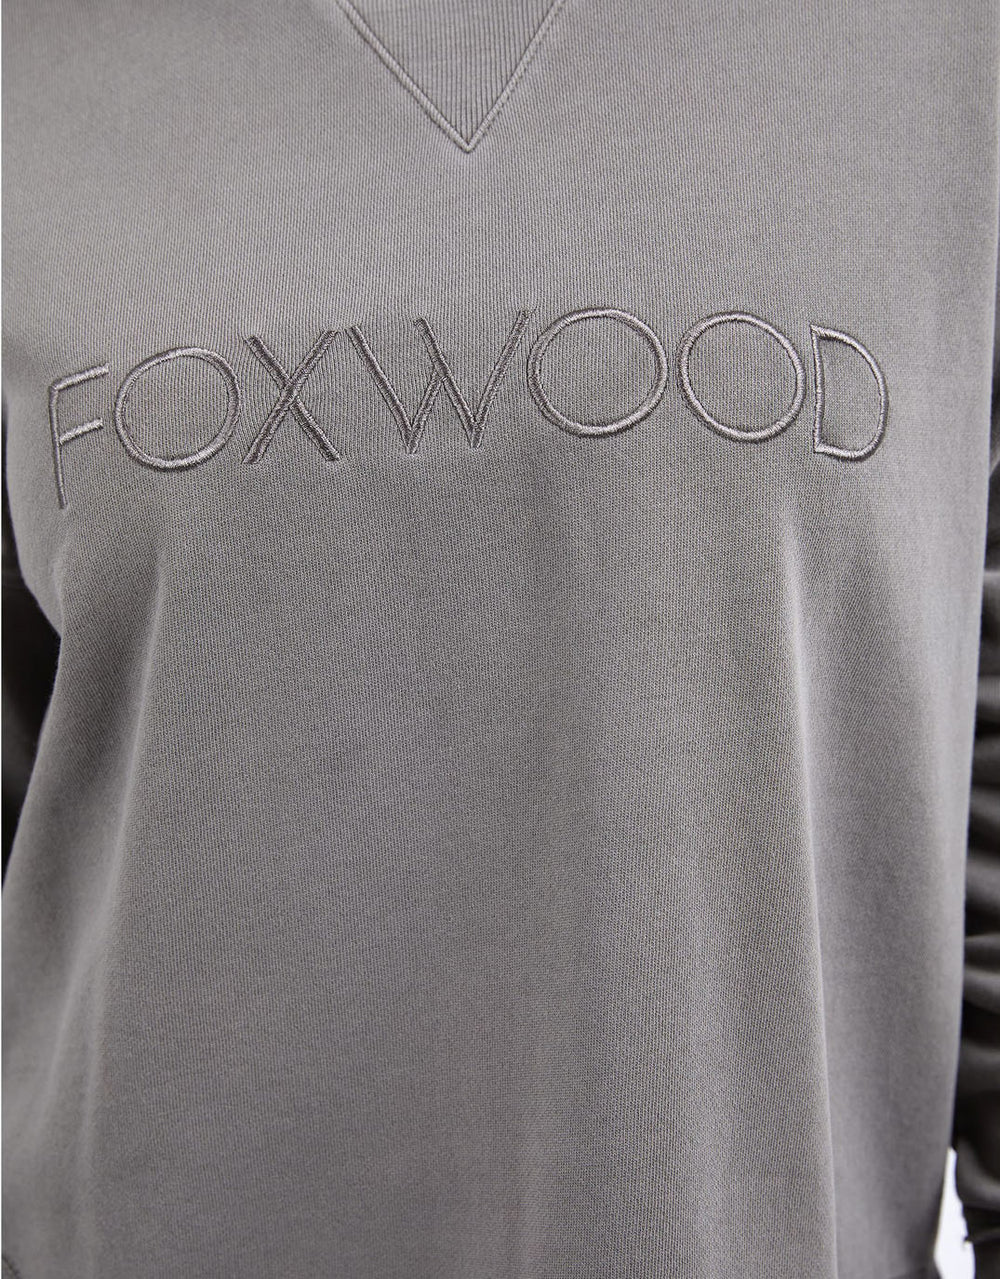 foxwood-simplified-crew-charcoal-womens-clothing